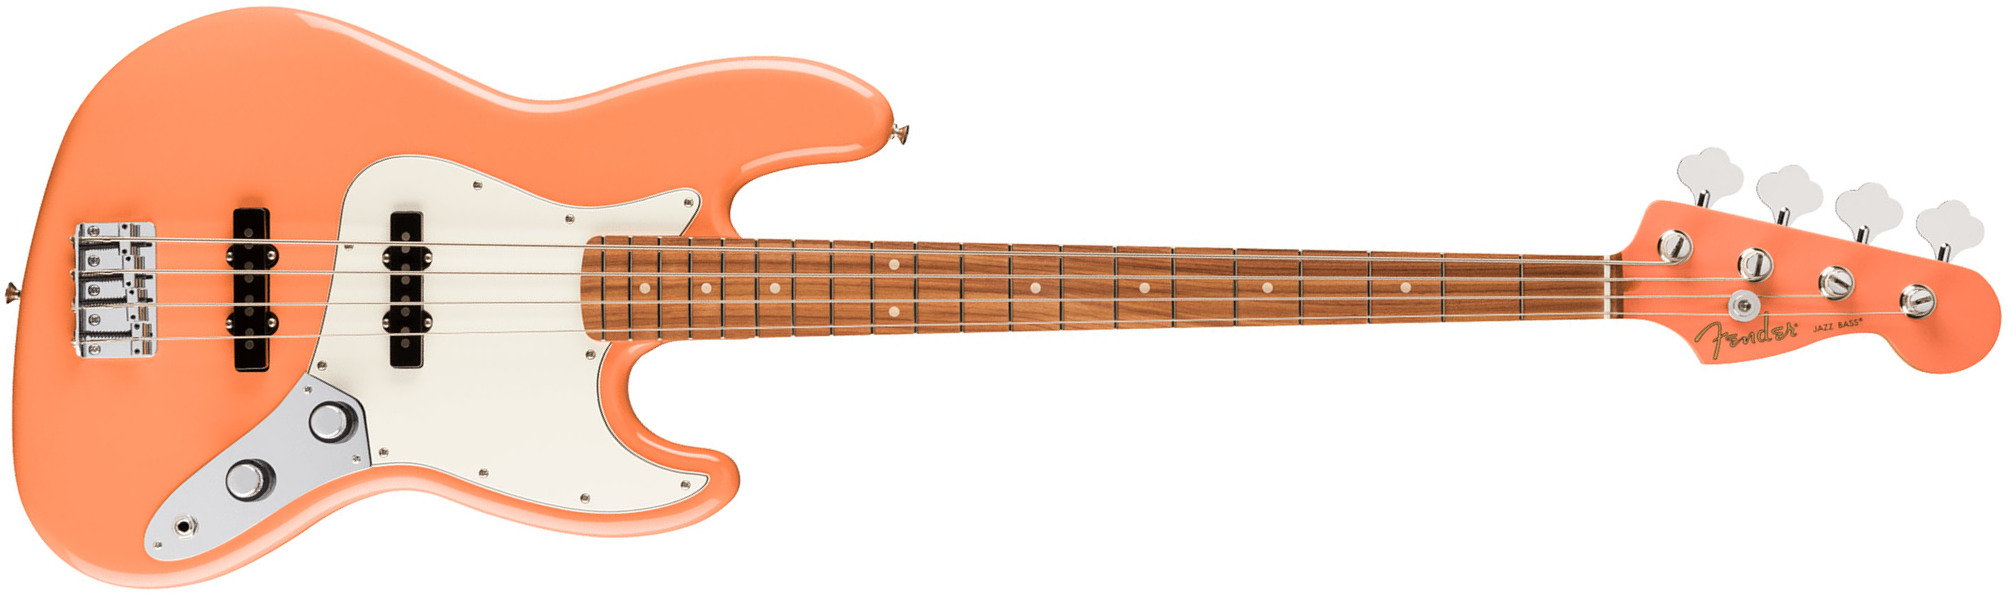 Fender Jazz Bass Player Mex Ltd Pf - Pacific Peach - Solid body electric bass - Main picture